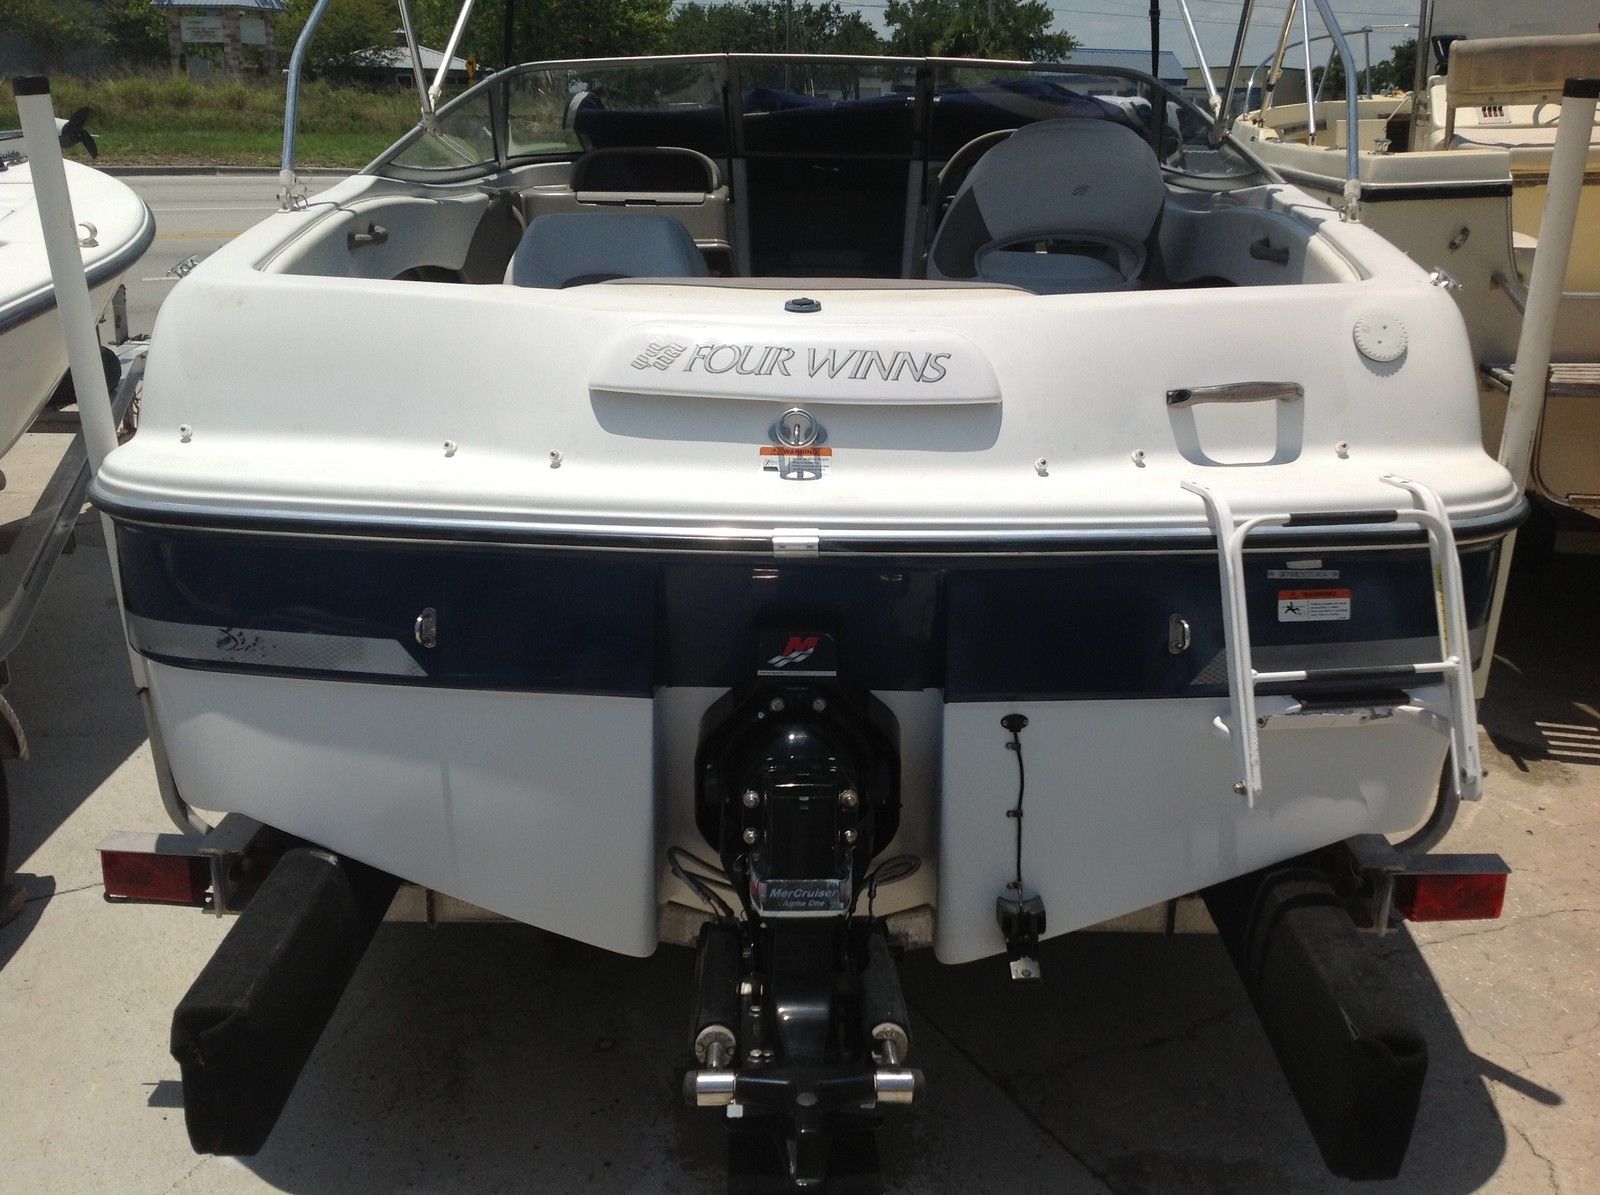 1993 Four Winns 180 Freedom Outboard - Bing images